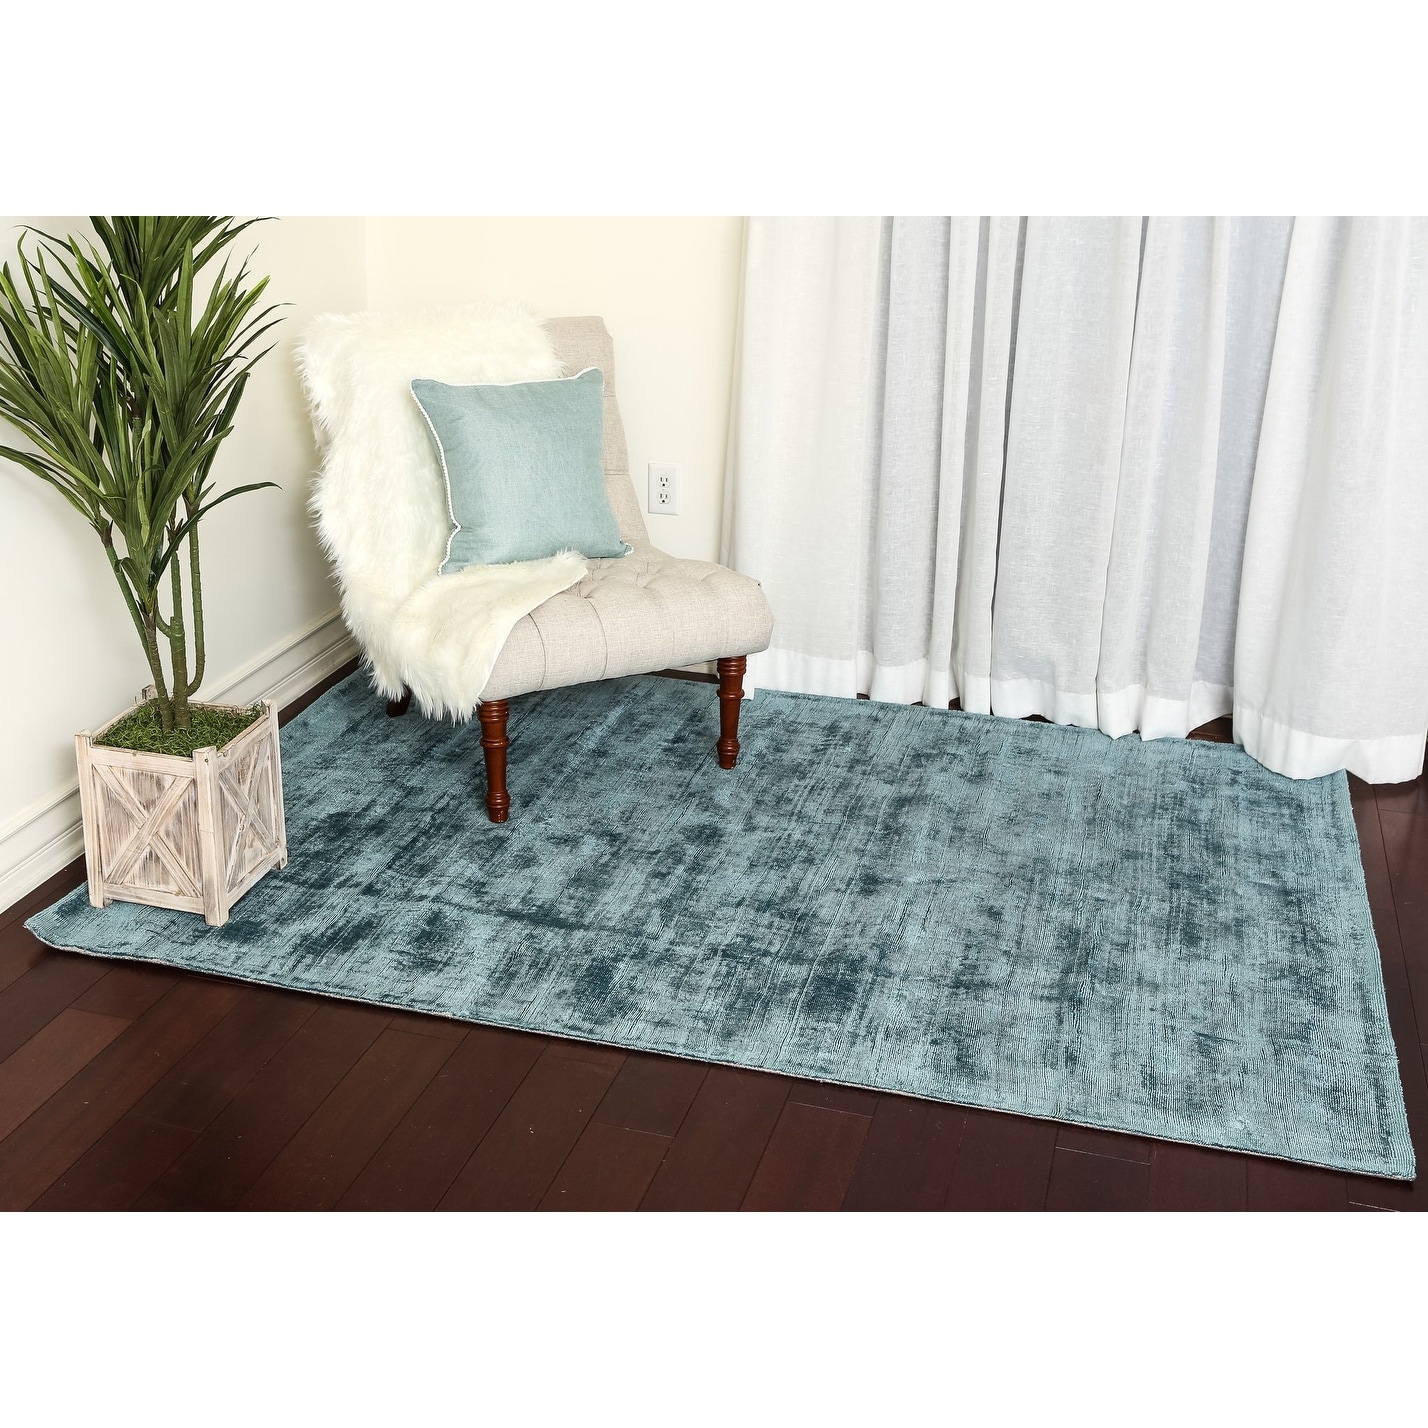 VERY THICK Runner exclusive Rugs IVANO beige 30 SIZES modern carpeting